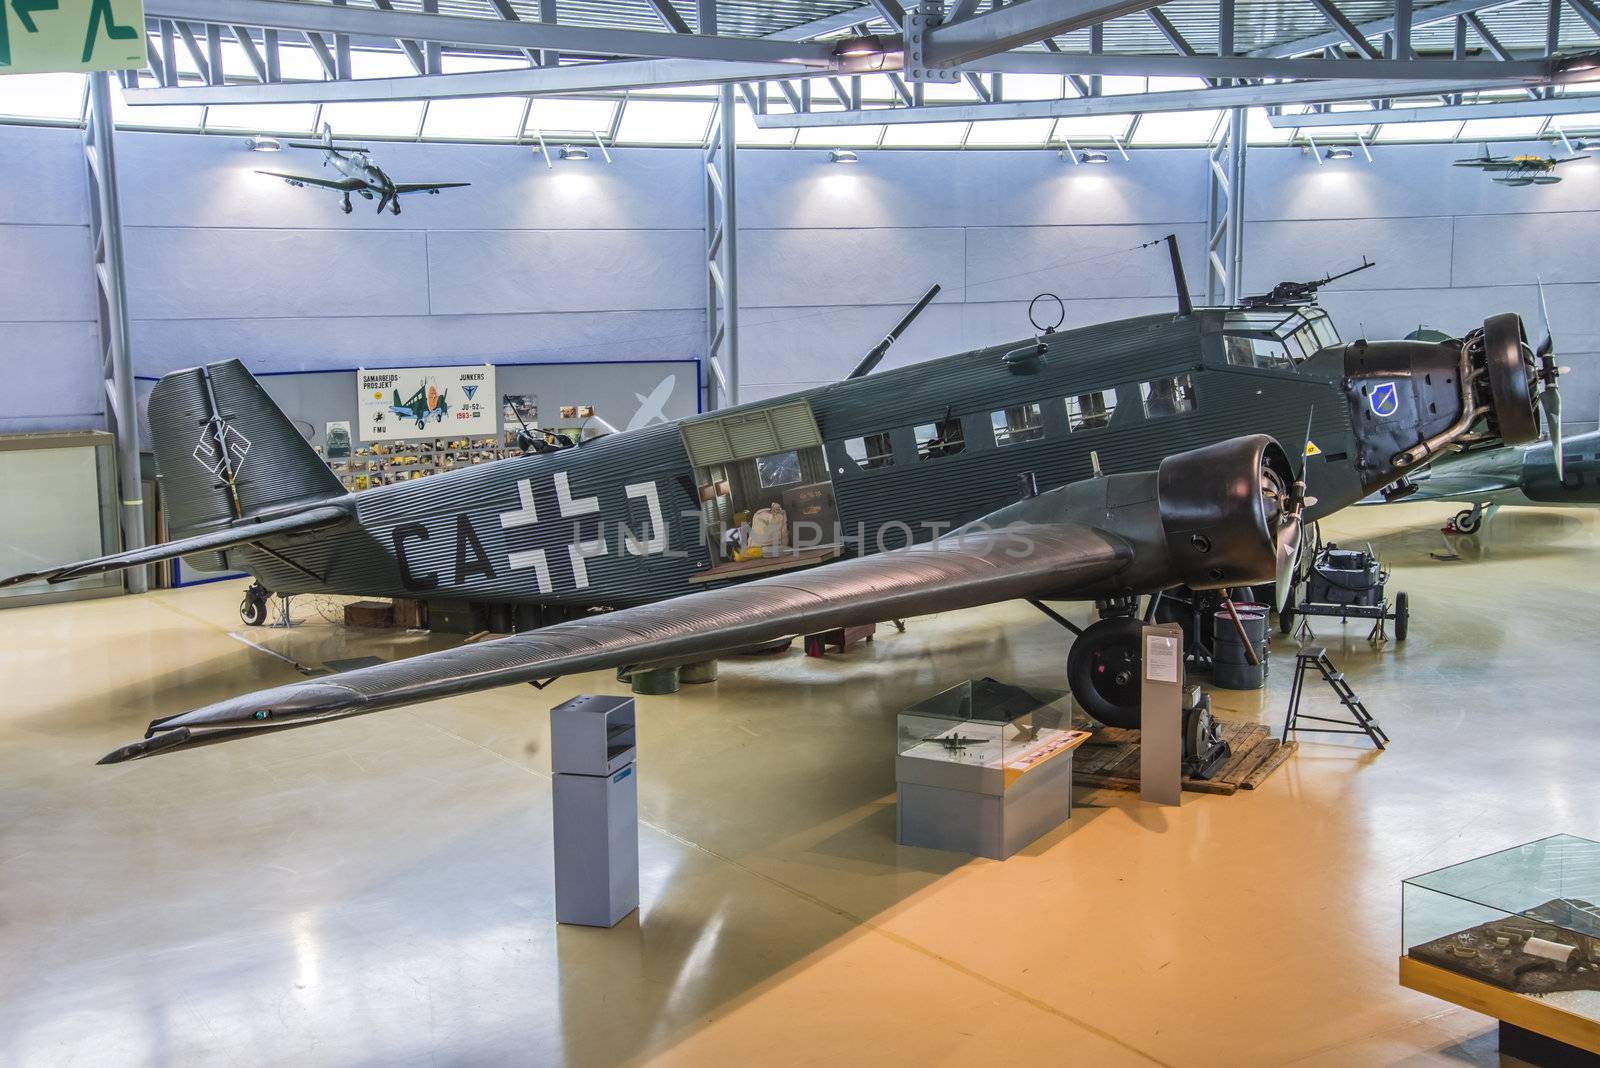 junkers ju 52 nicknamed "aunt ju", was a combined passenger and cargo aircraft manufactured by Junkers 1932-1945, the pictures are shot in march 2013 by norwegian armed forces aircraft collection which is a military aviation museum located at gardermoen, north of oslo, norway.